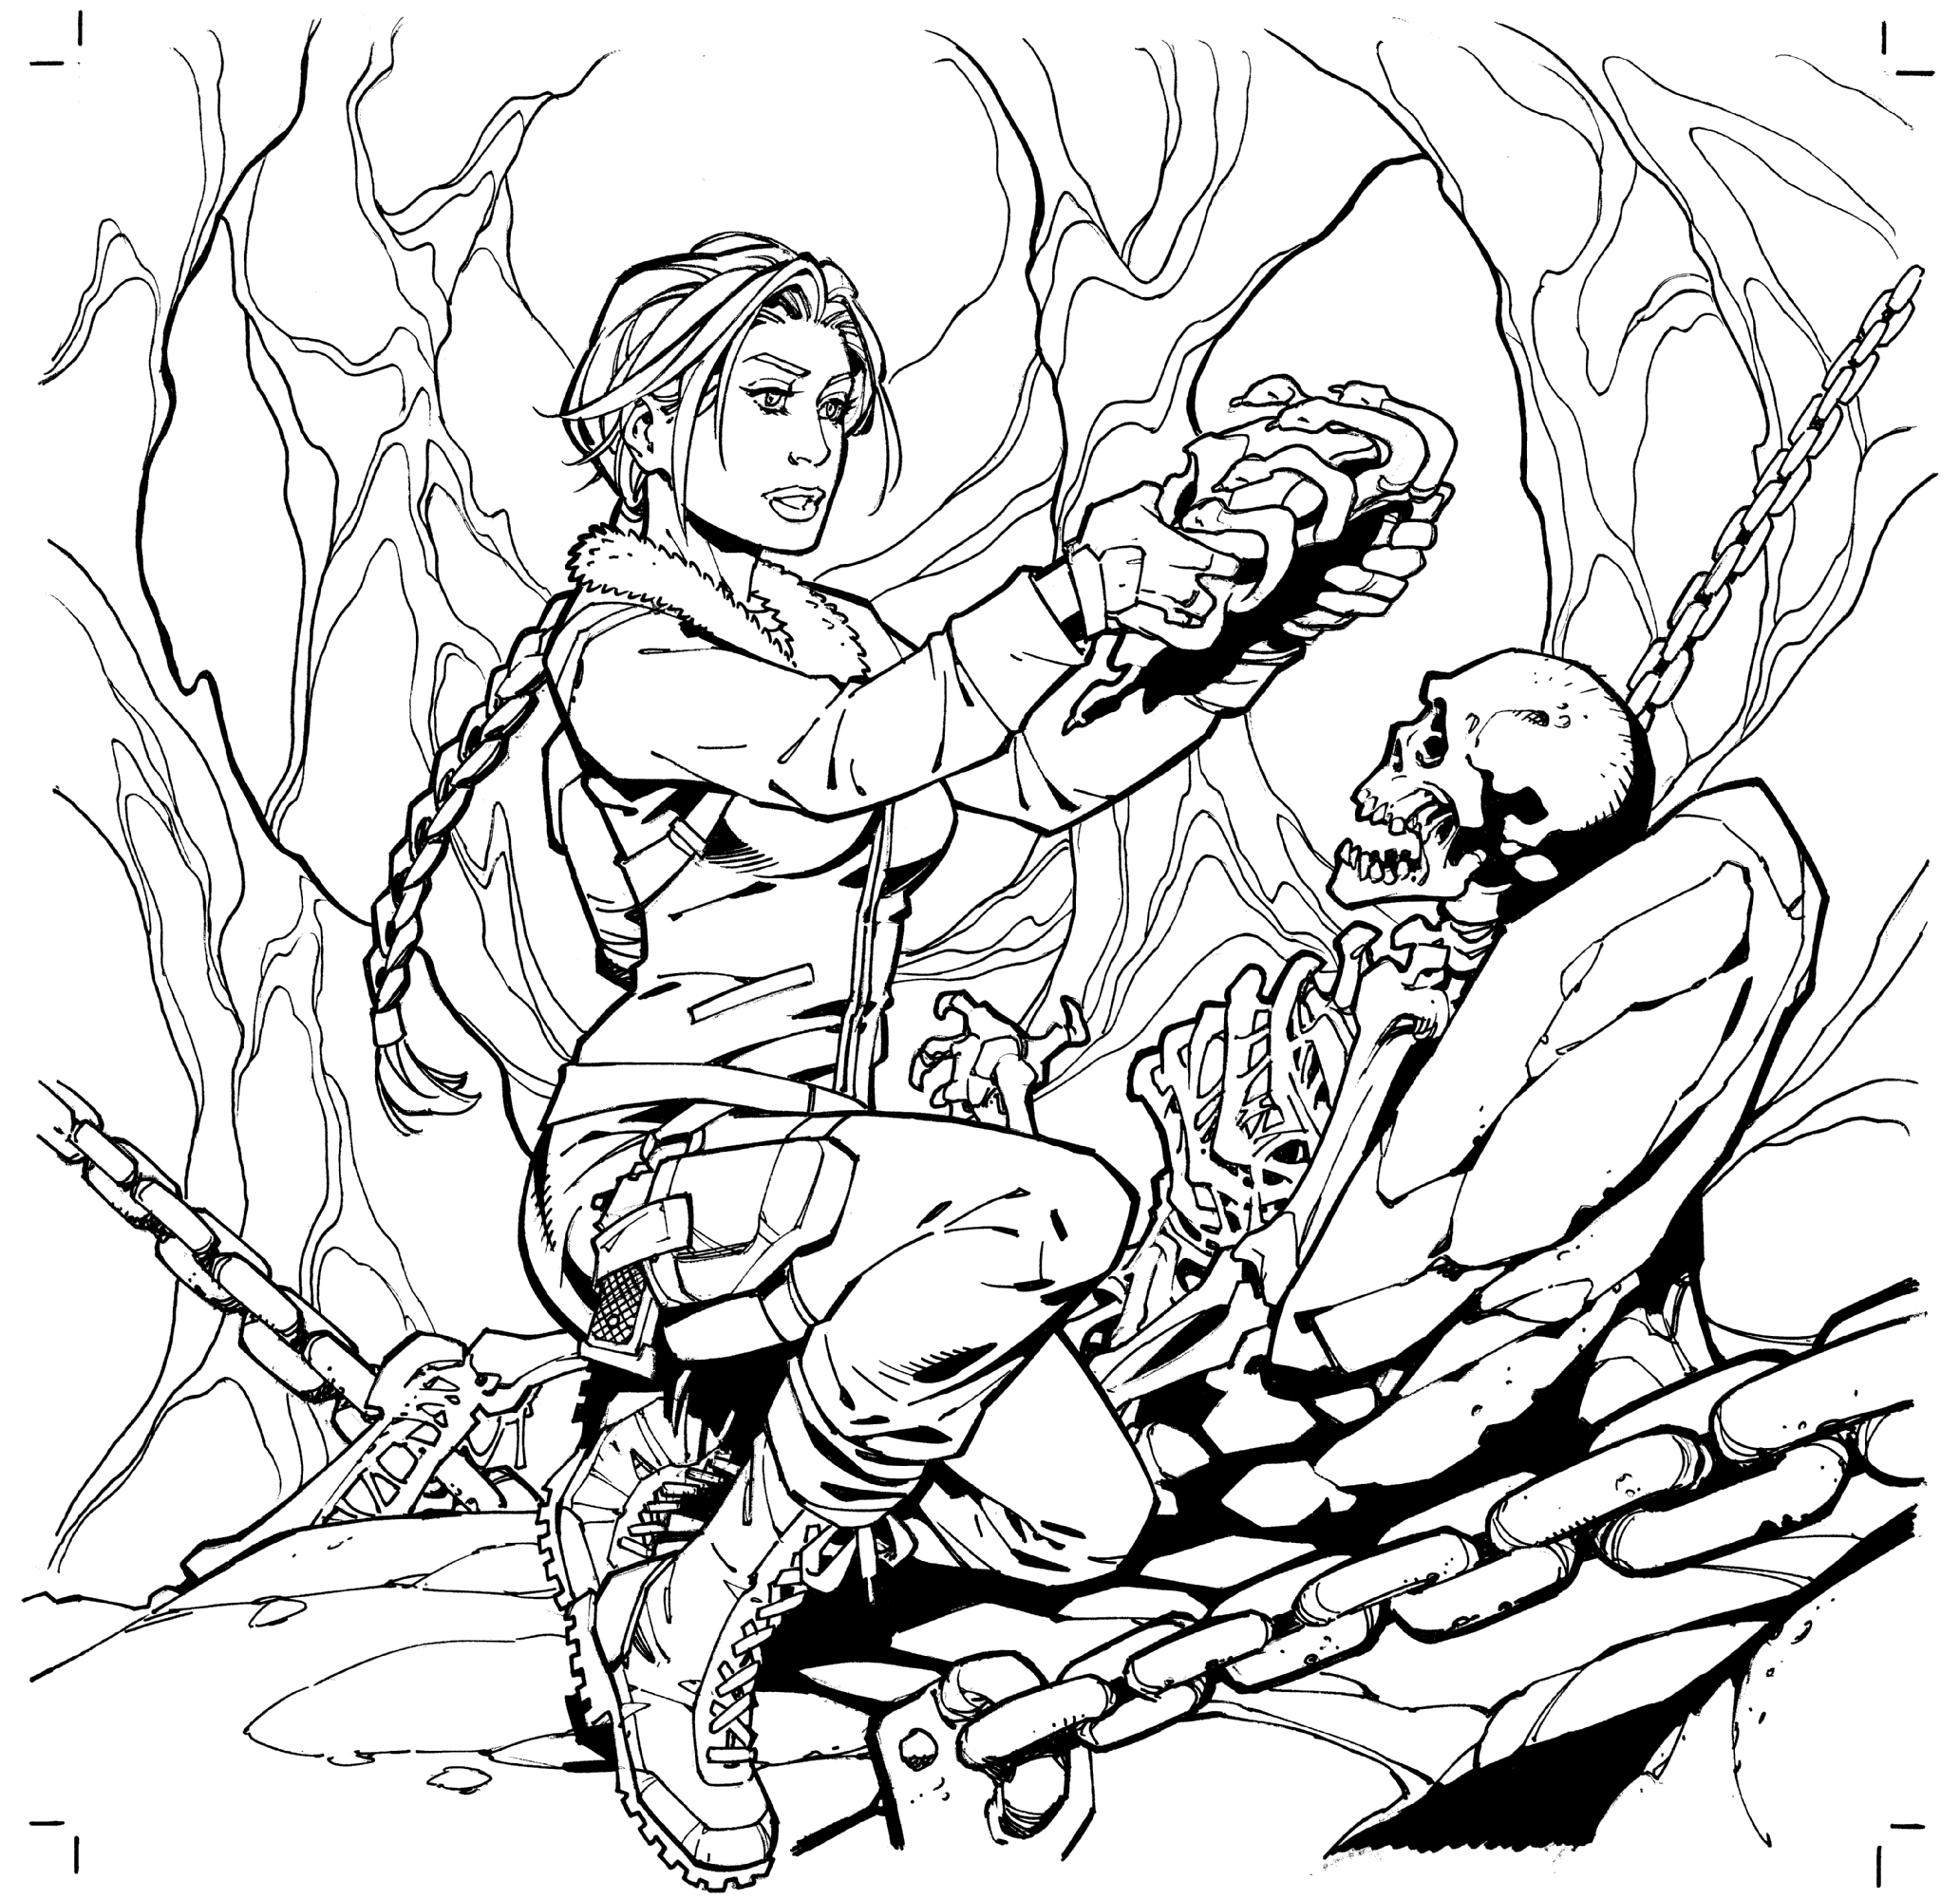 Lara & Medusa Mask Tomb Raider Coloring Book by Randy Green, in MGA-MICHAEL  ALEXANDER's FOR SALE Comic Art Gallery Room